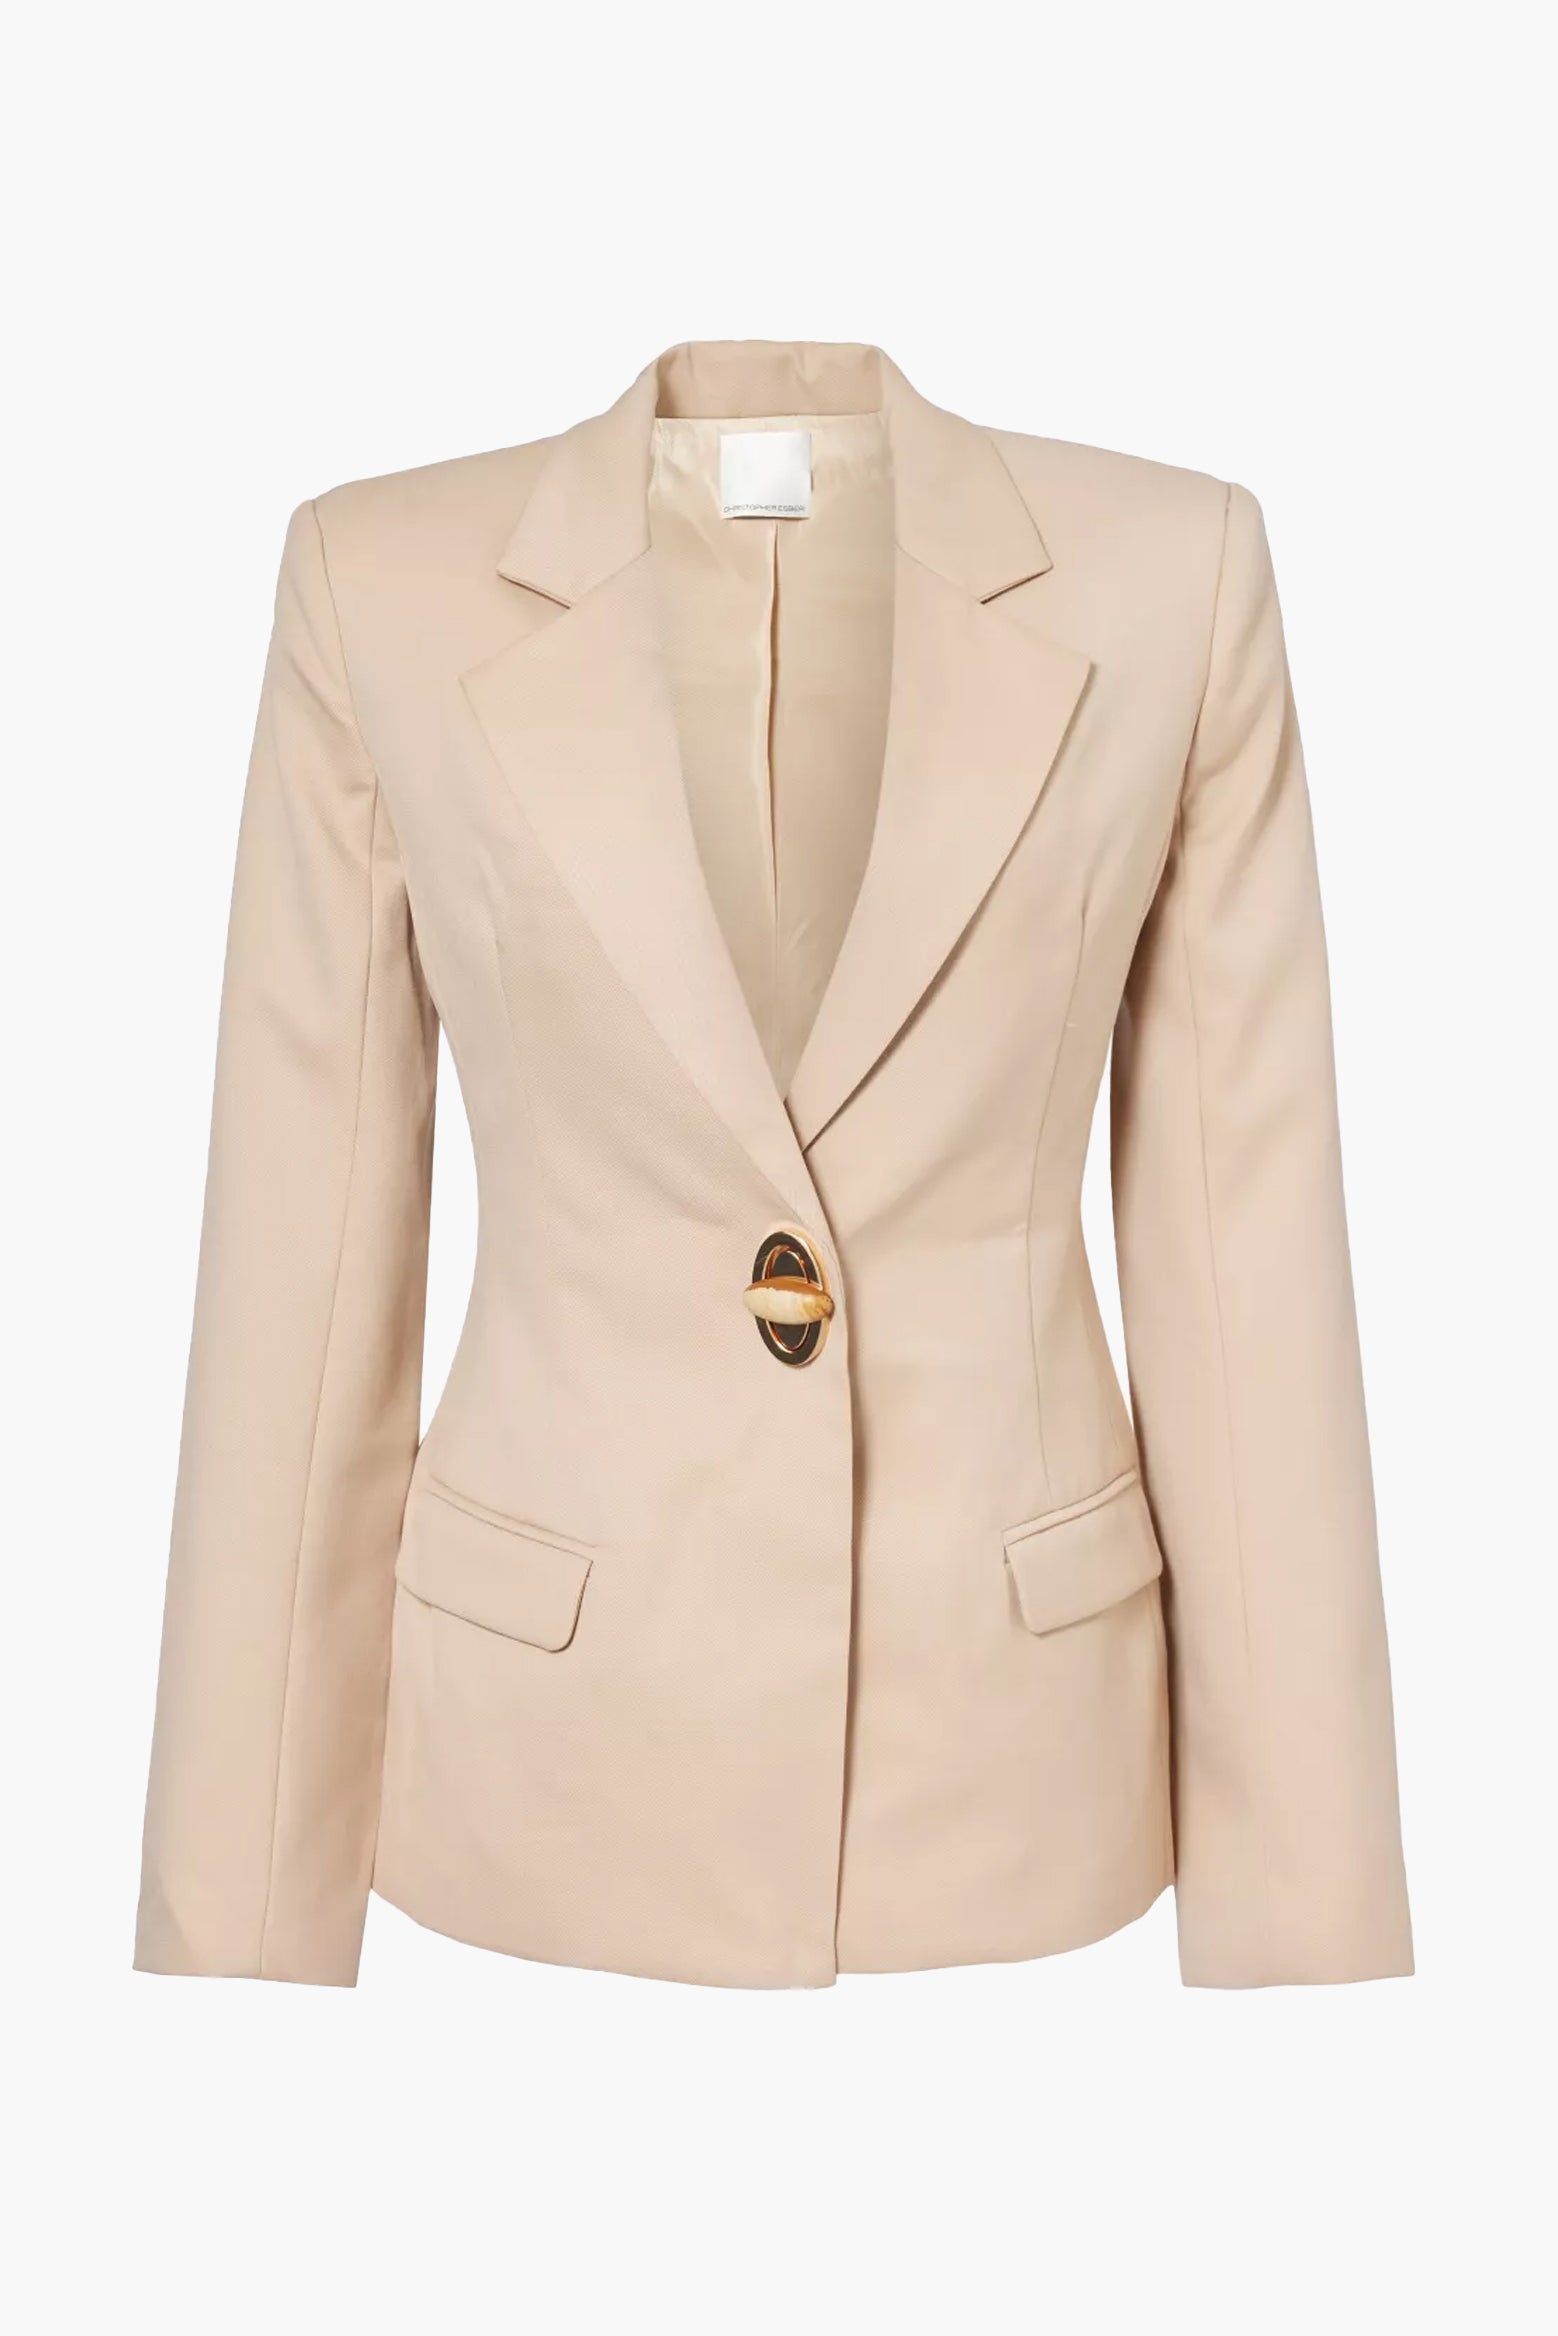 Christopher Esber Apex Racquet Blazer in Sand available at The New Trend Australia.